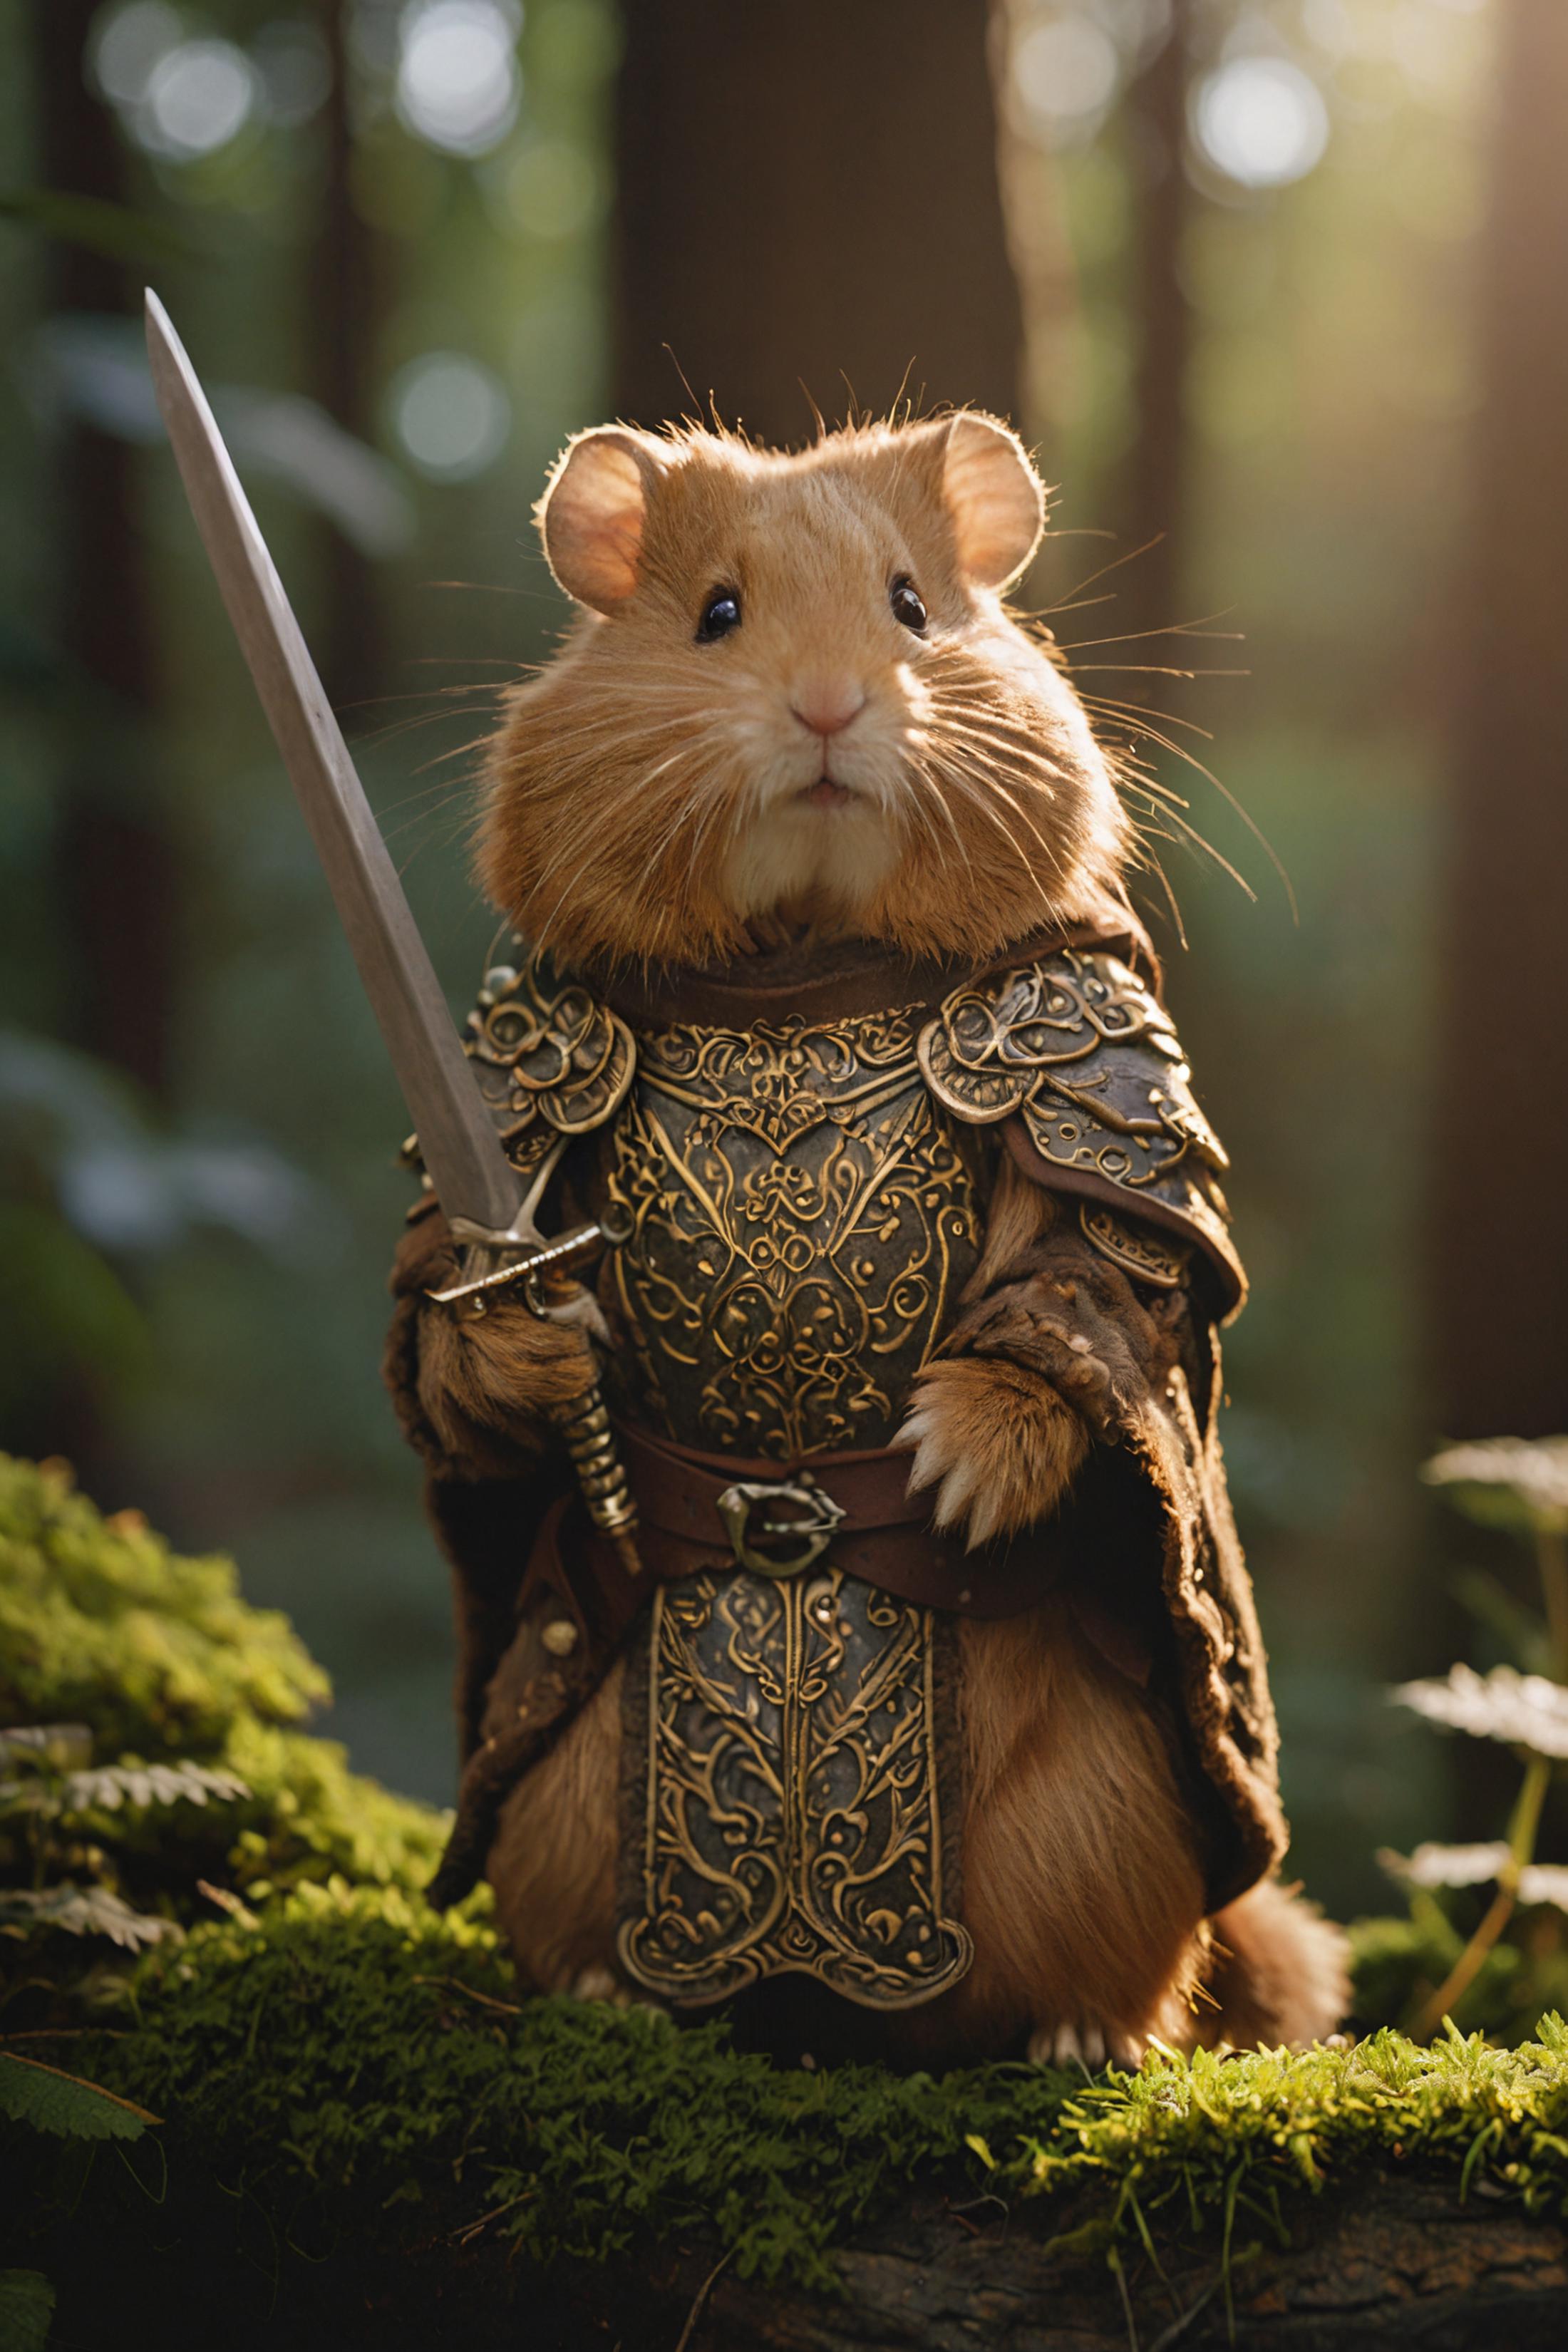 A hamster wearing a costume and holding a sword.